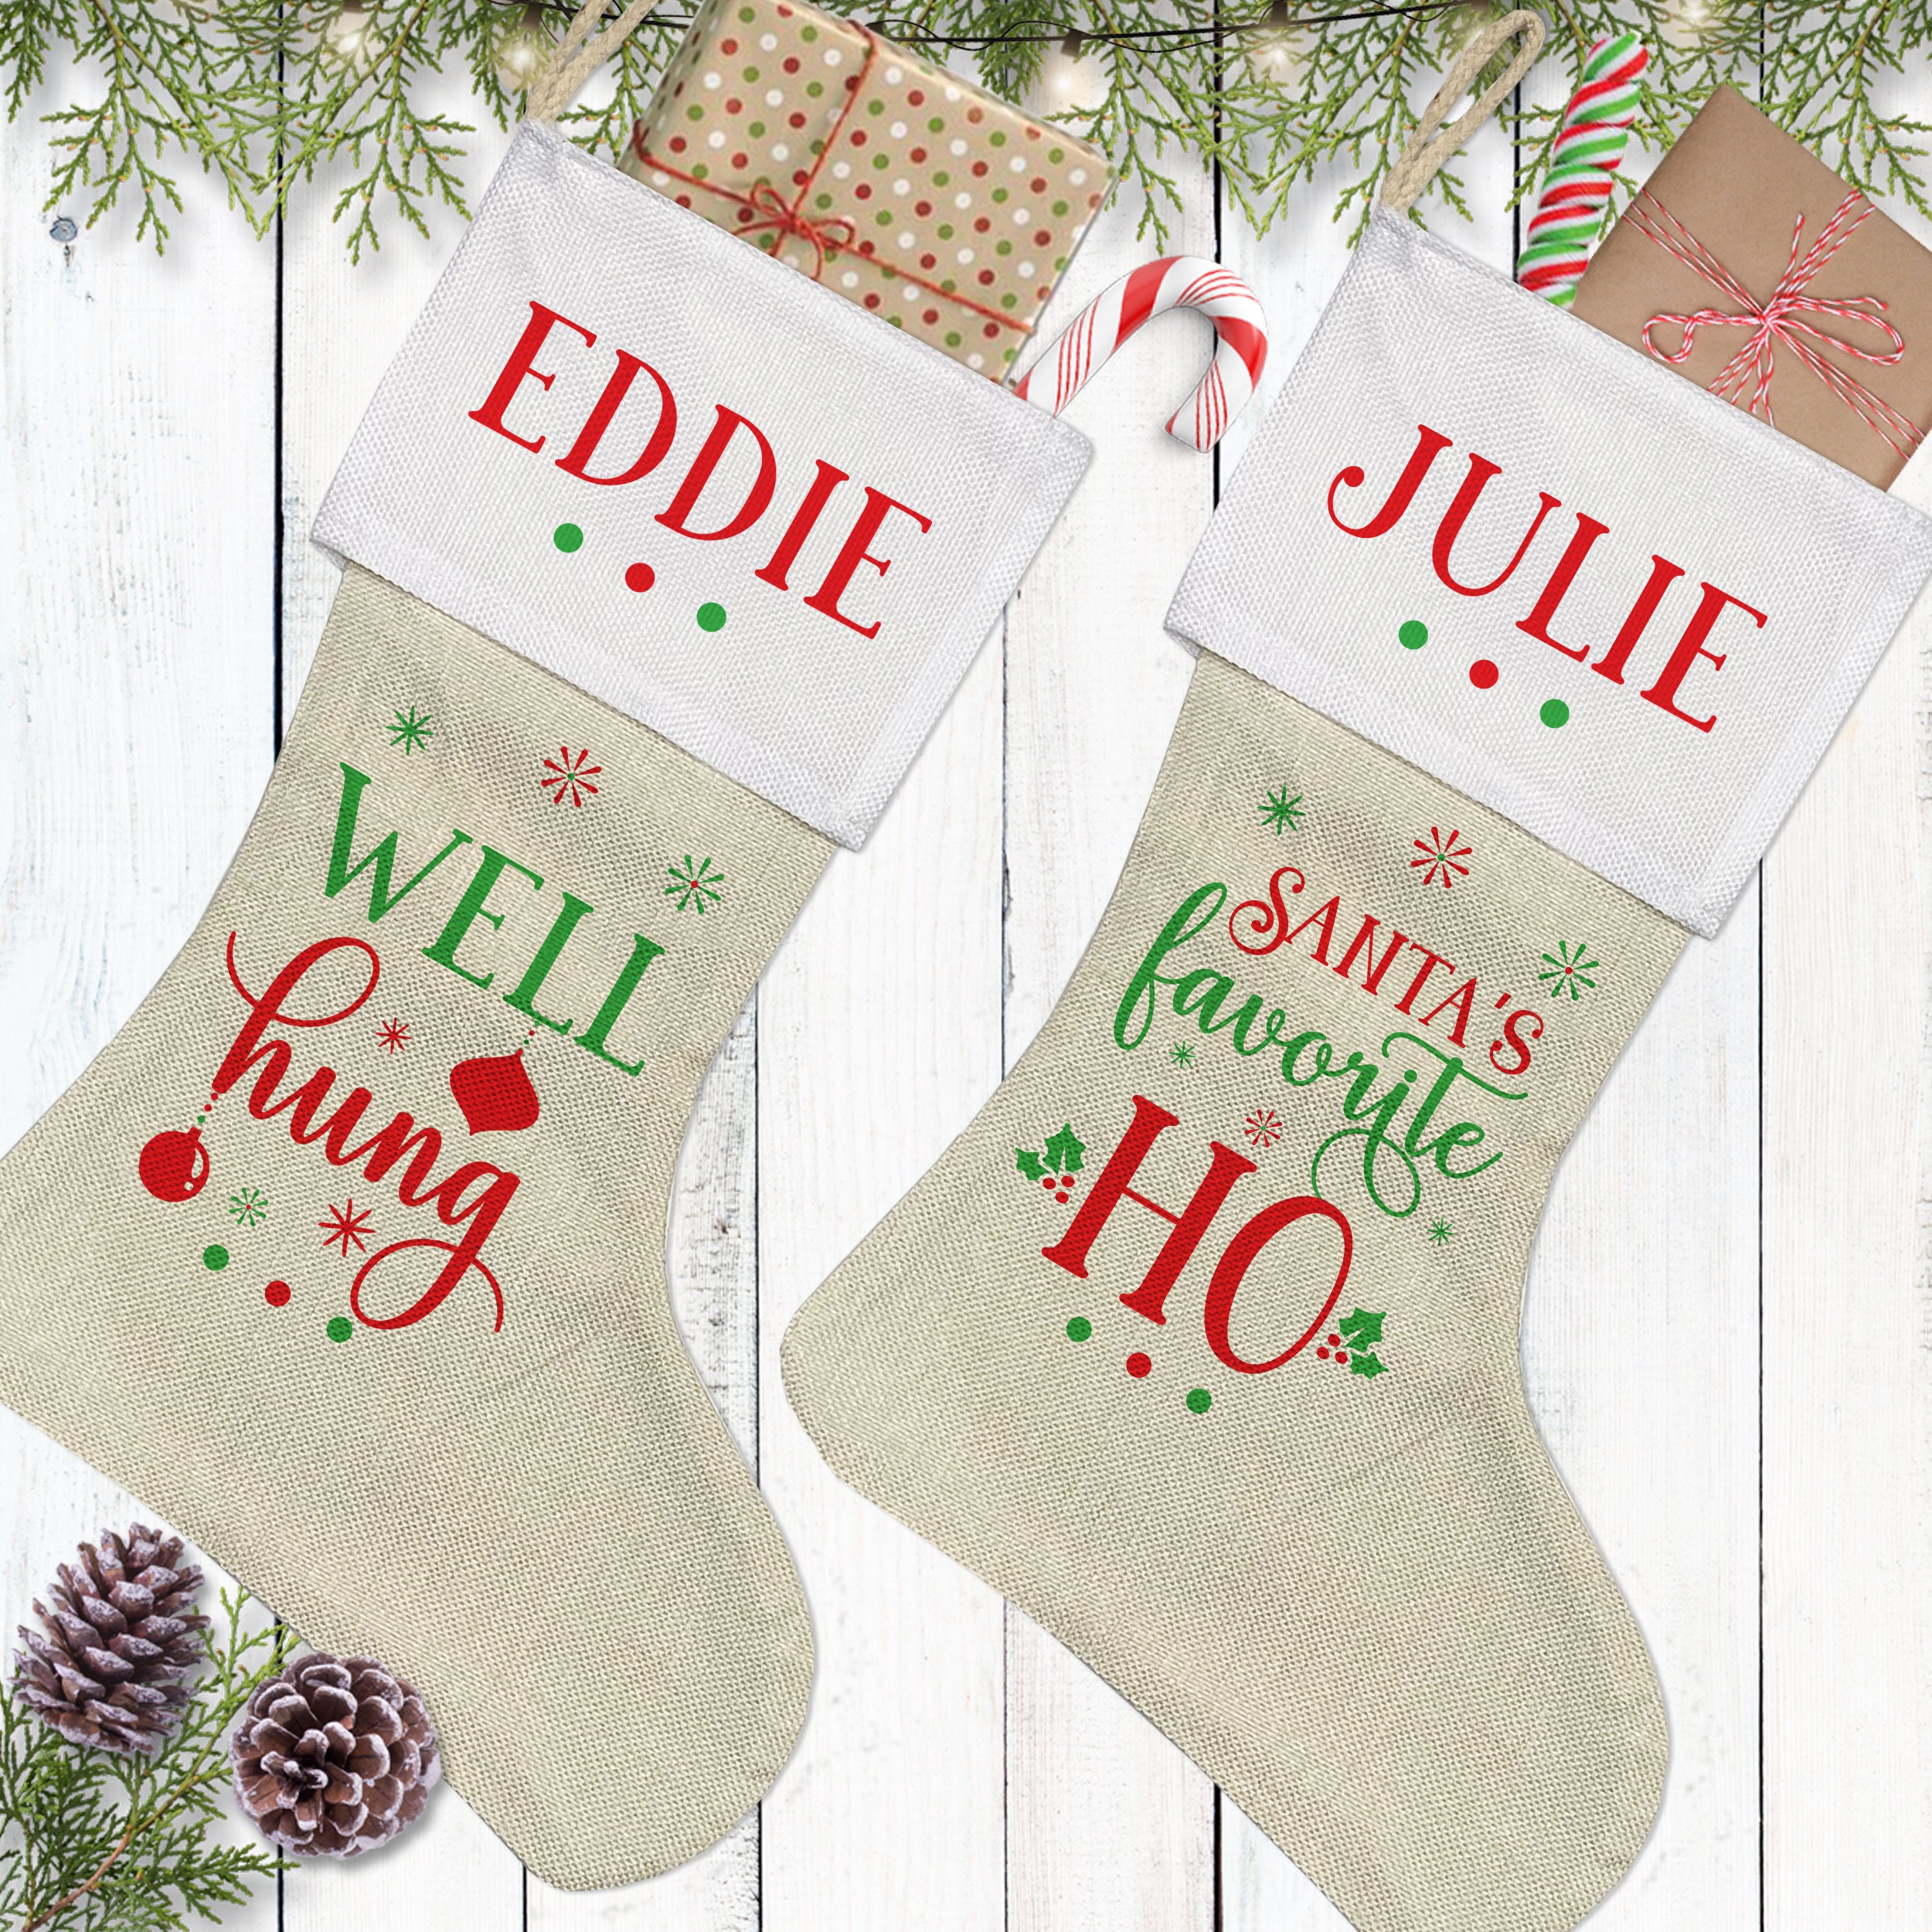 Funny Christmas Stockings, There's Some Ho Ho Ho's in This House Stockings,  Plaid Cuff Stockings, Funny Stockings, Funny Christmas Decor 